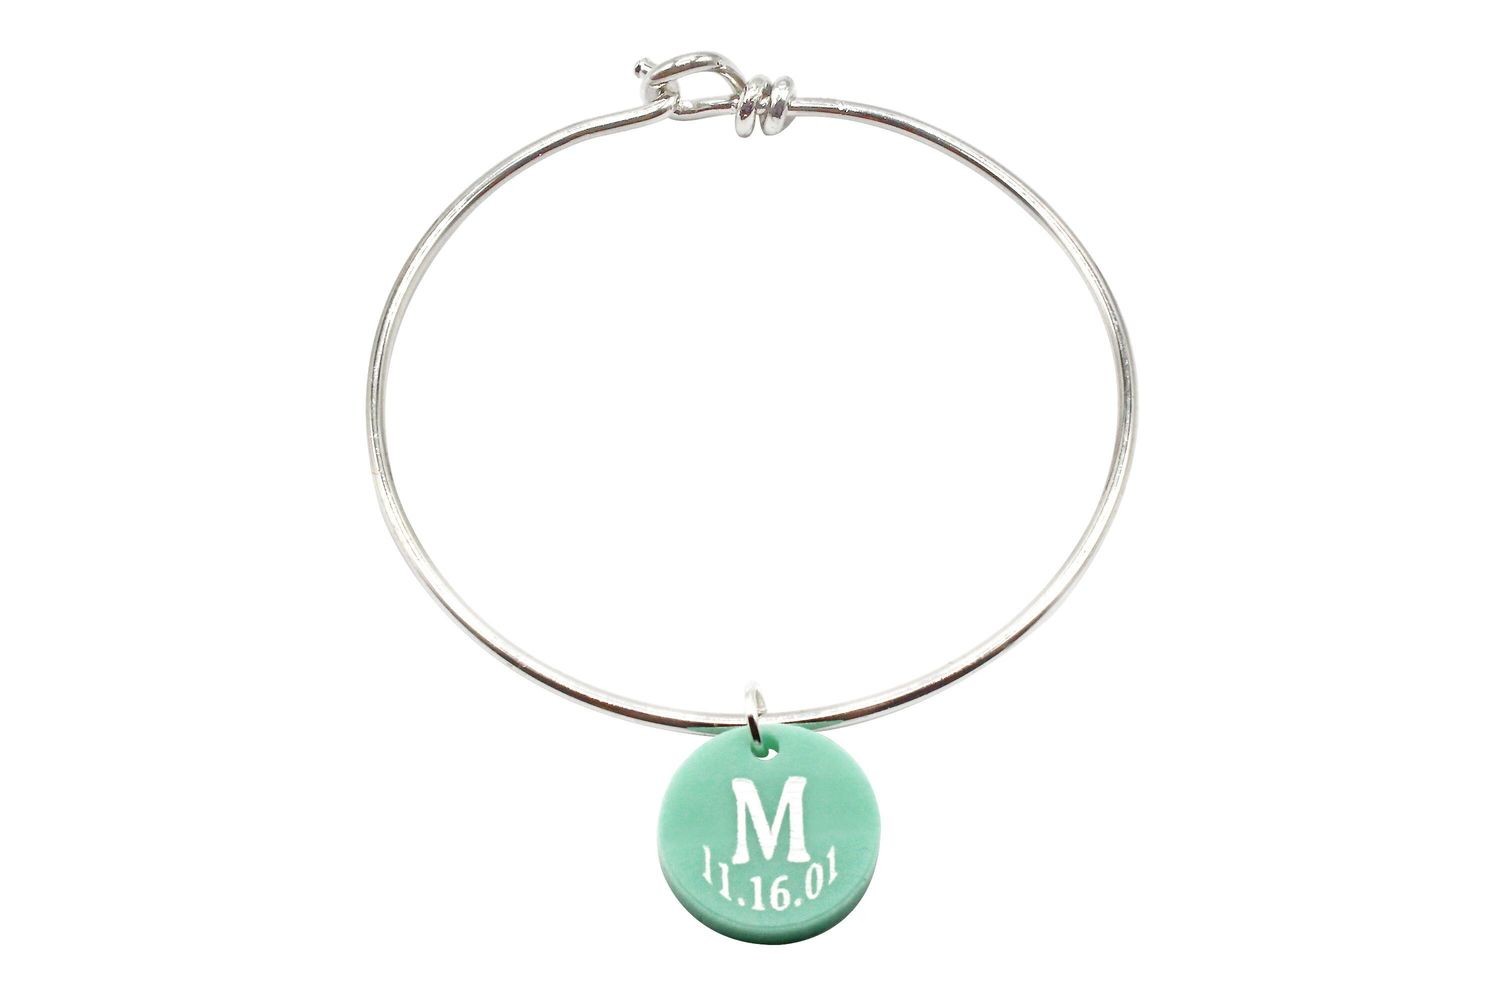 Initial Charm with Date on Decorative Wire Bracelet